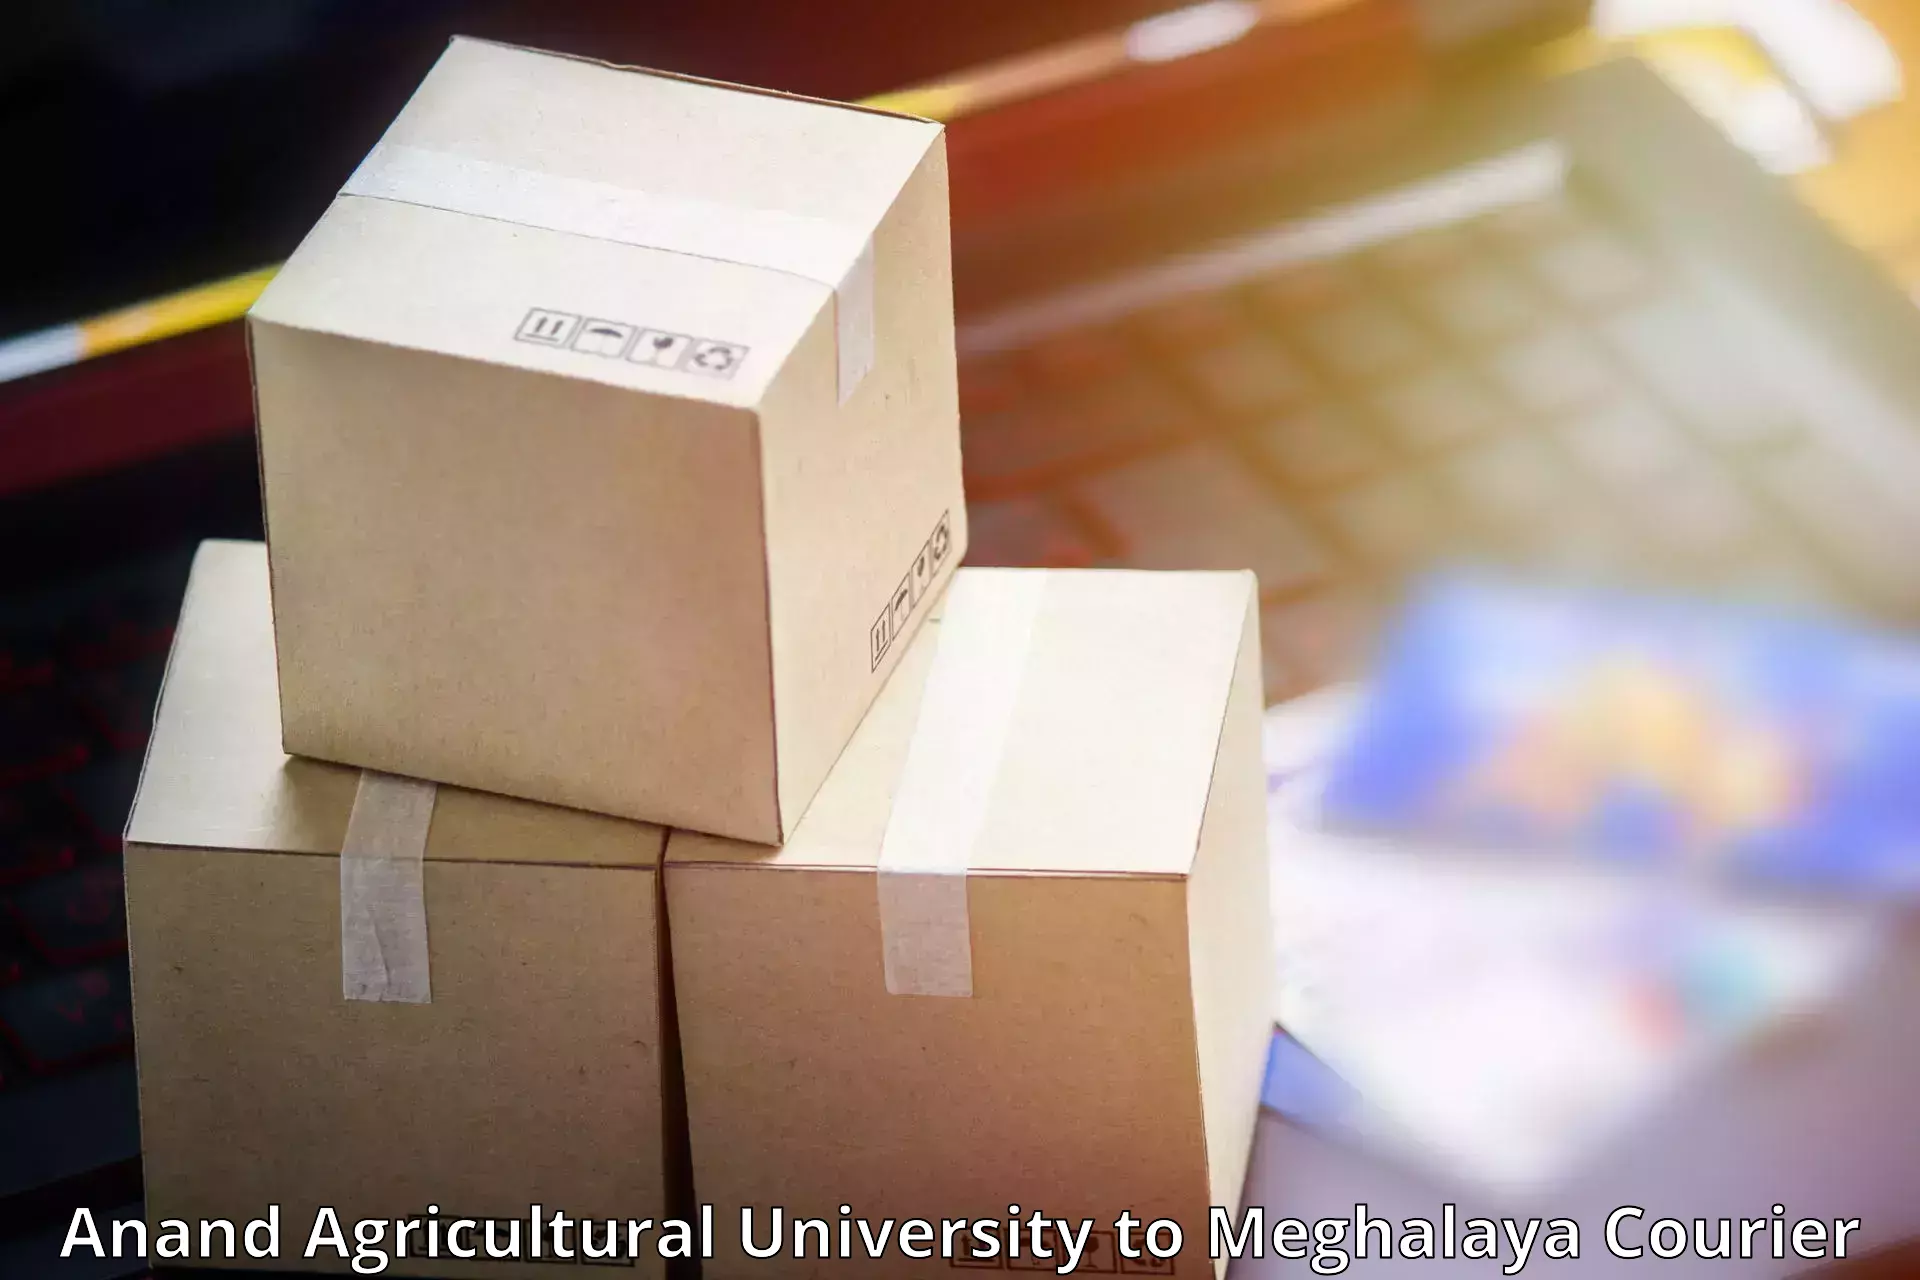 Nationwide courier service Anand Agricultural University to North Eastern Hill University Shillong